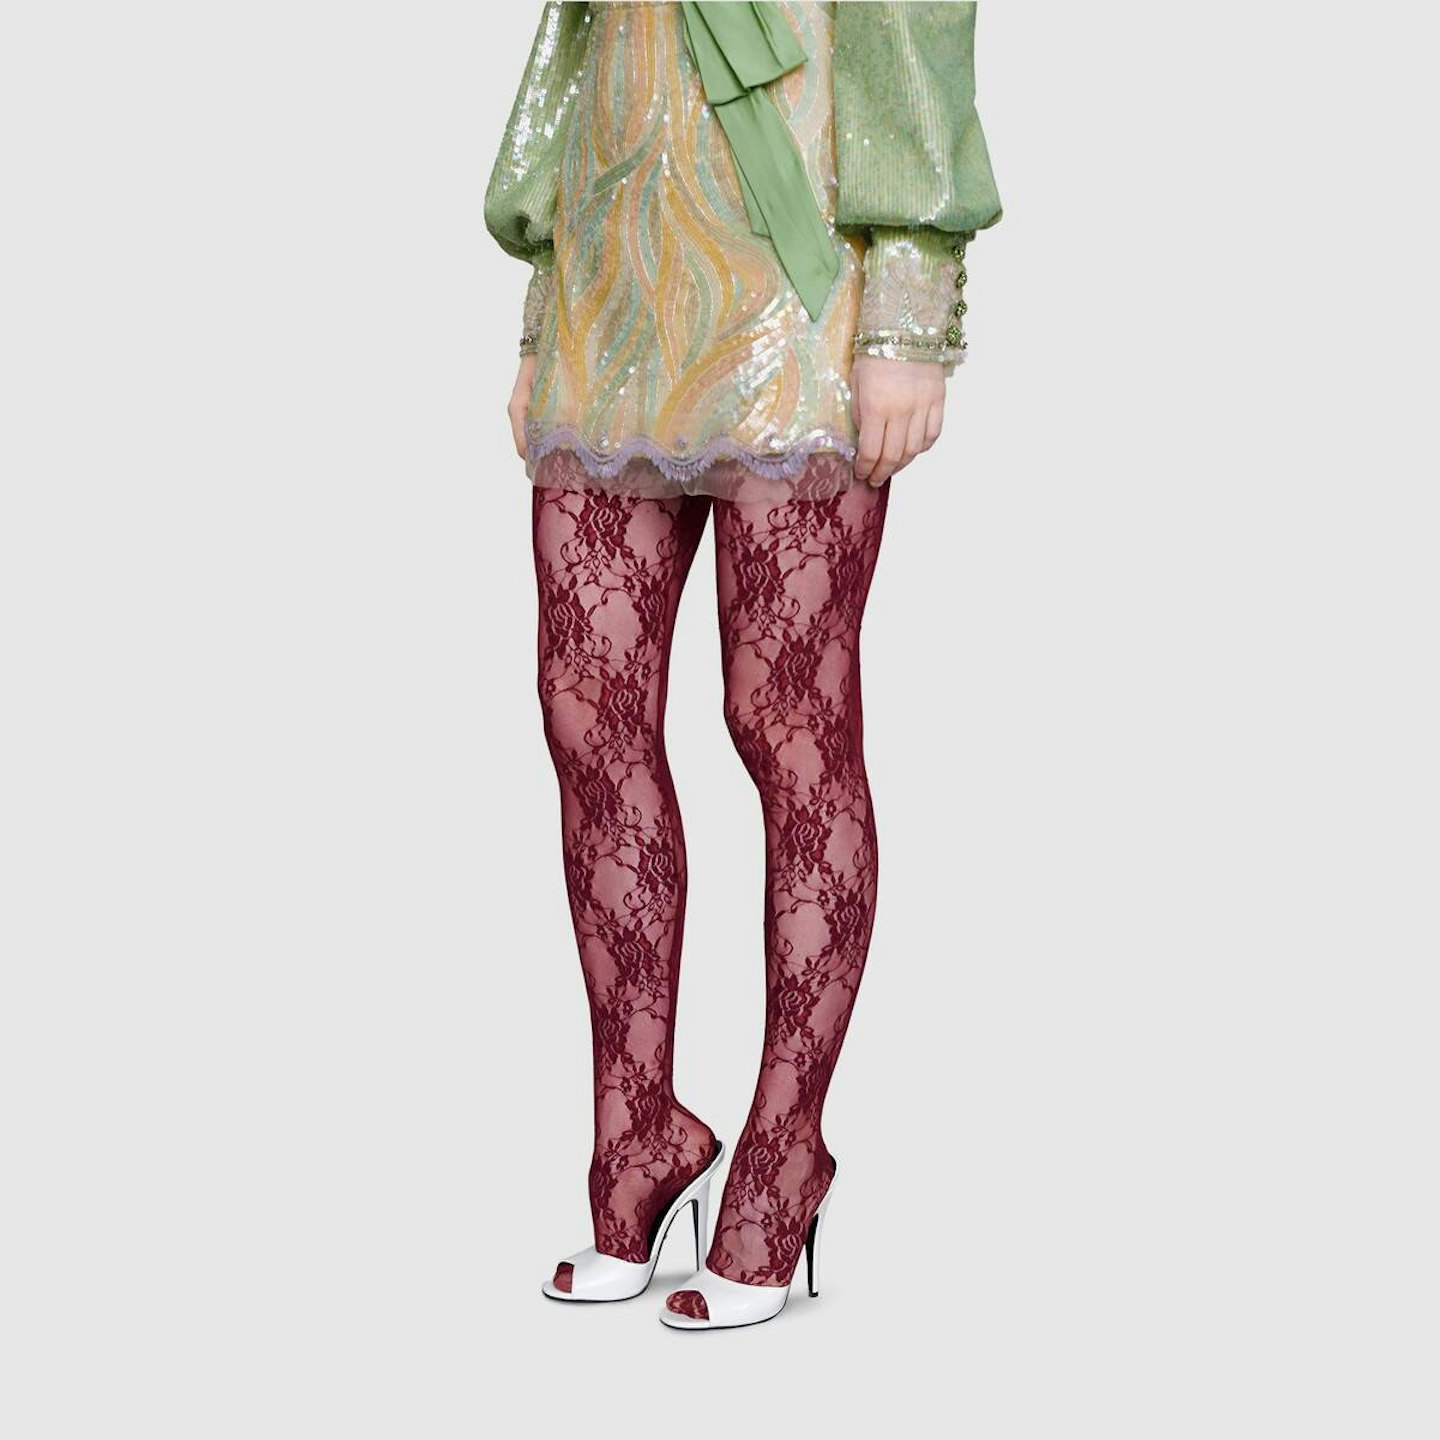 Gucci, Floral Lace Tights, £120